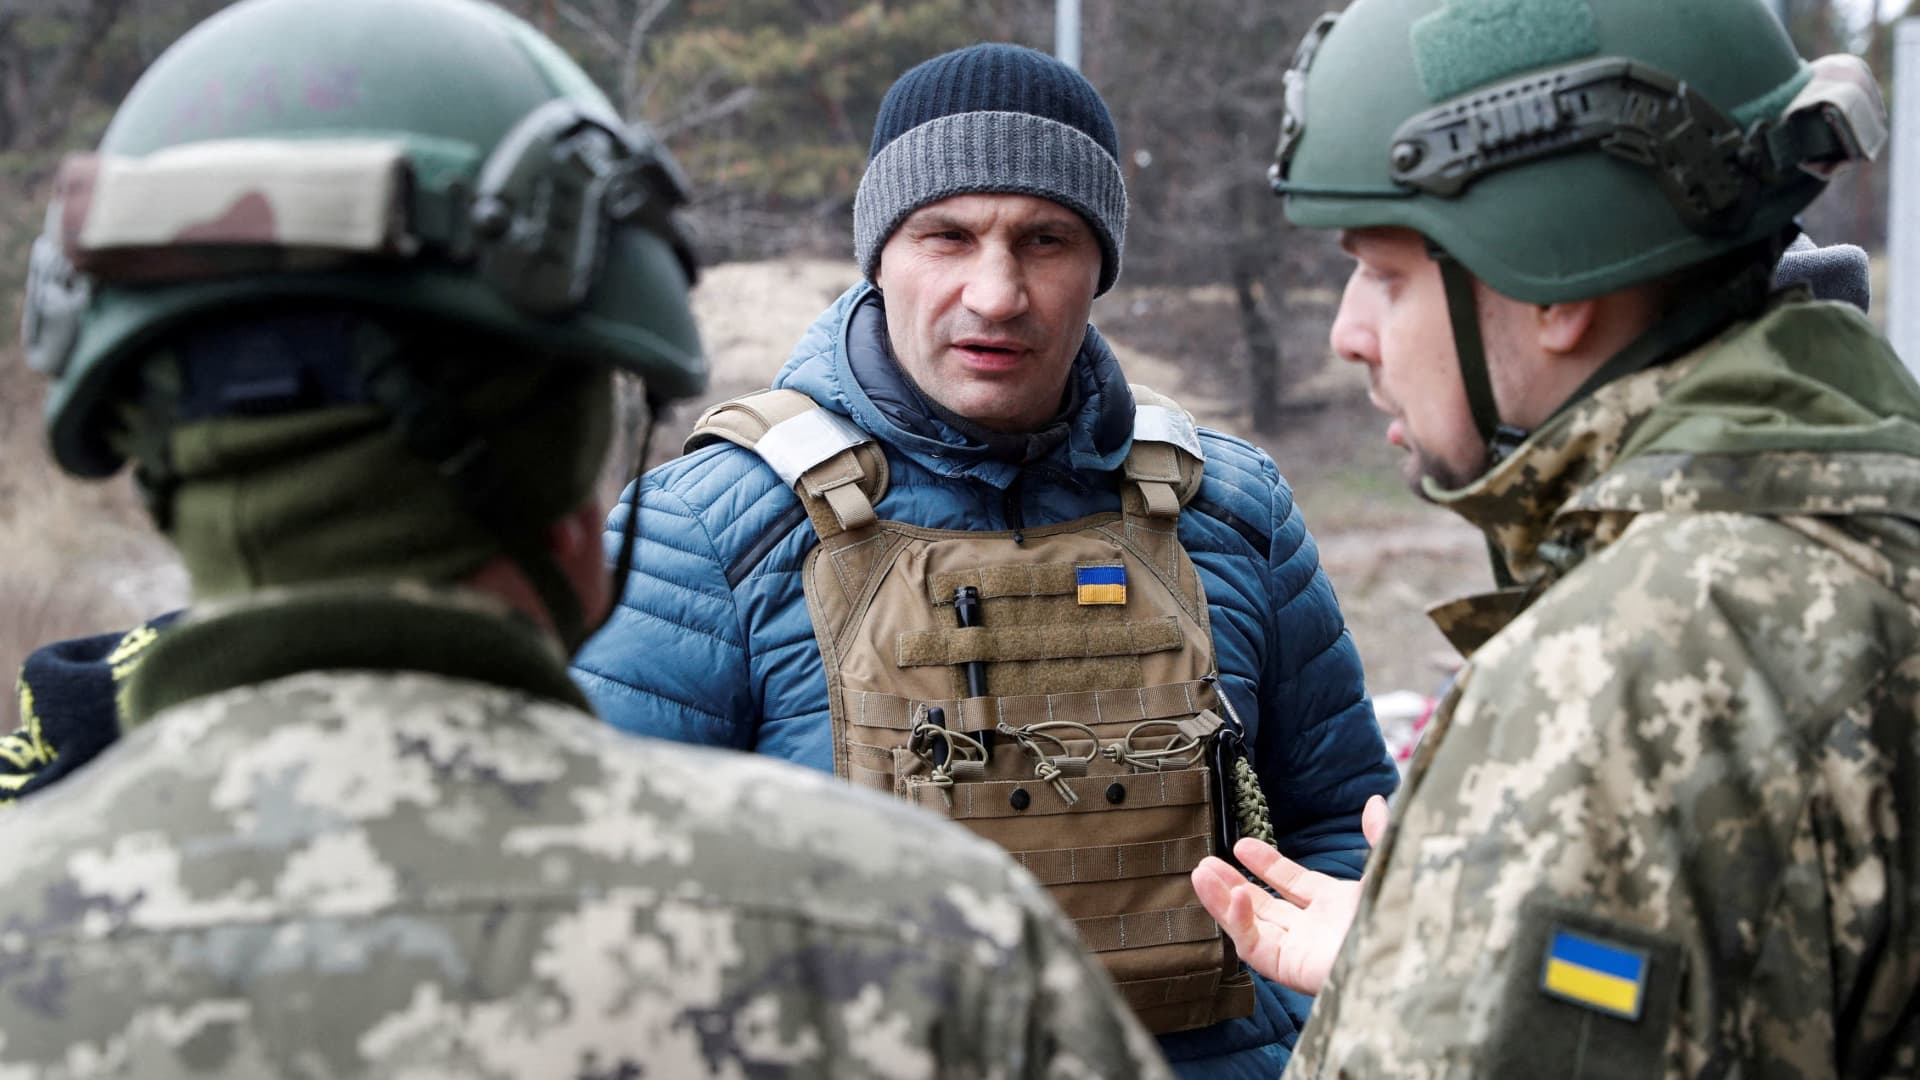 Kyiv Mayor Vitali Klitschko visits a checkpoint of the Ukrainian Territorial Defense Forces in Kyiv on March 6, 2022.